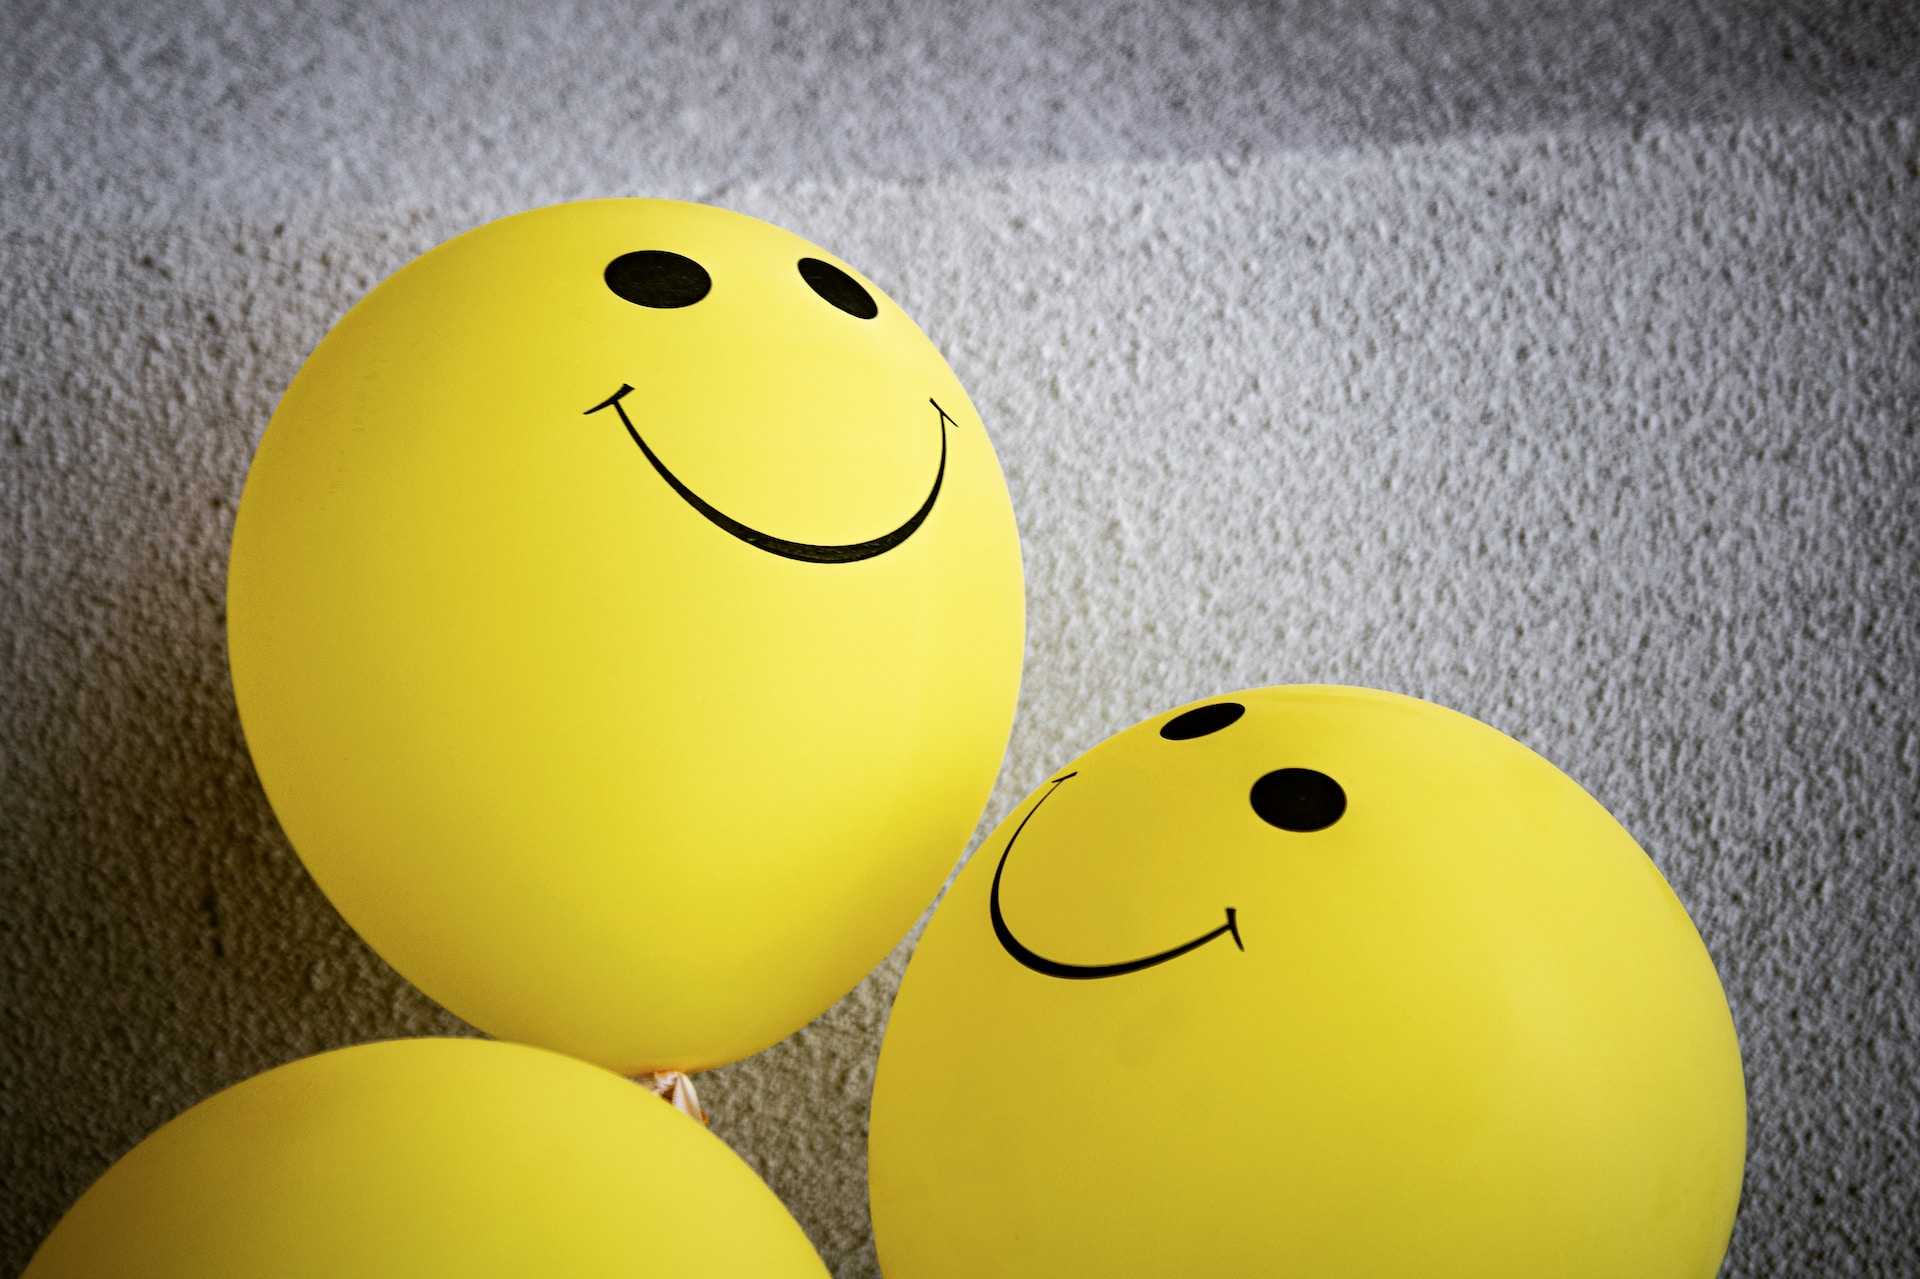 yellow balloons with smiles showing compliments and positivity